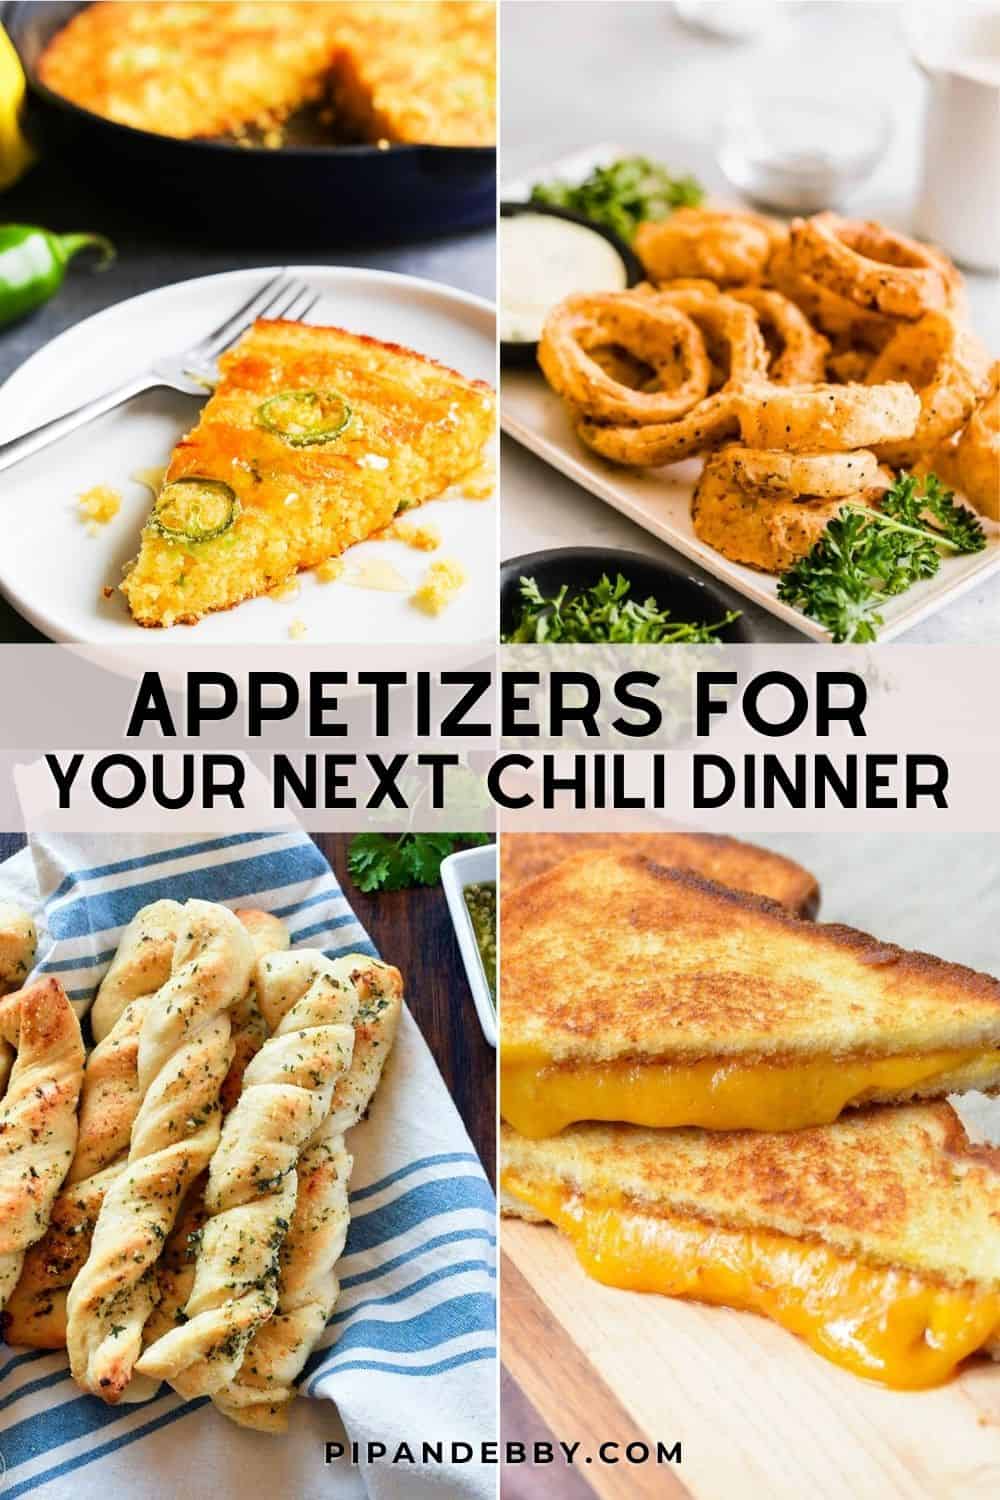 Four images of food in a grid with text overlay reading, "Appetizers for your next chili dinner."